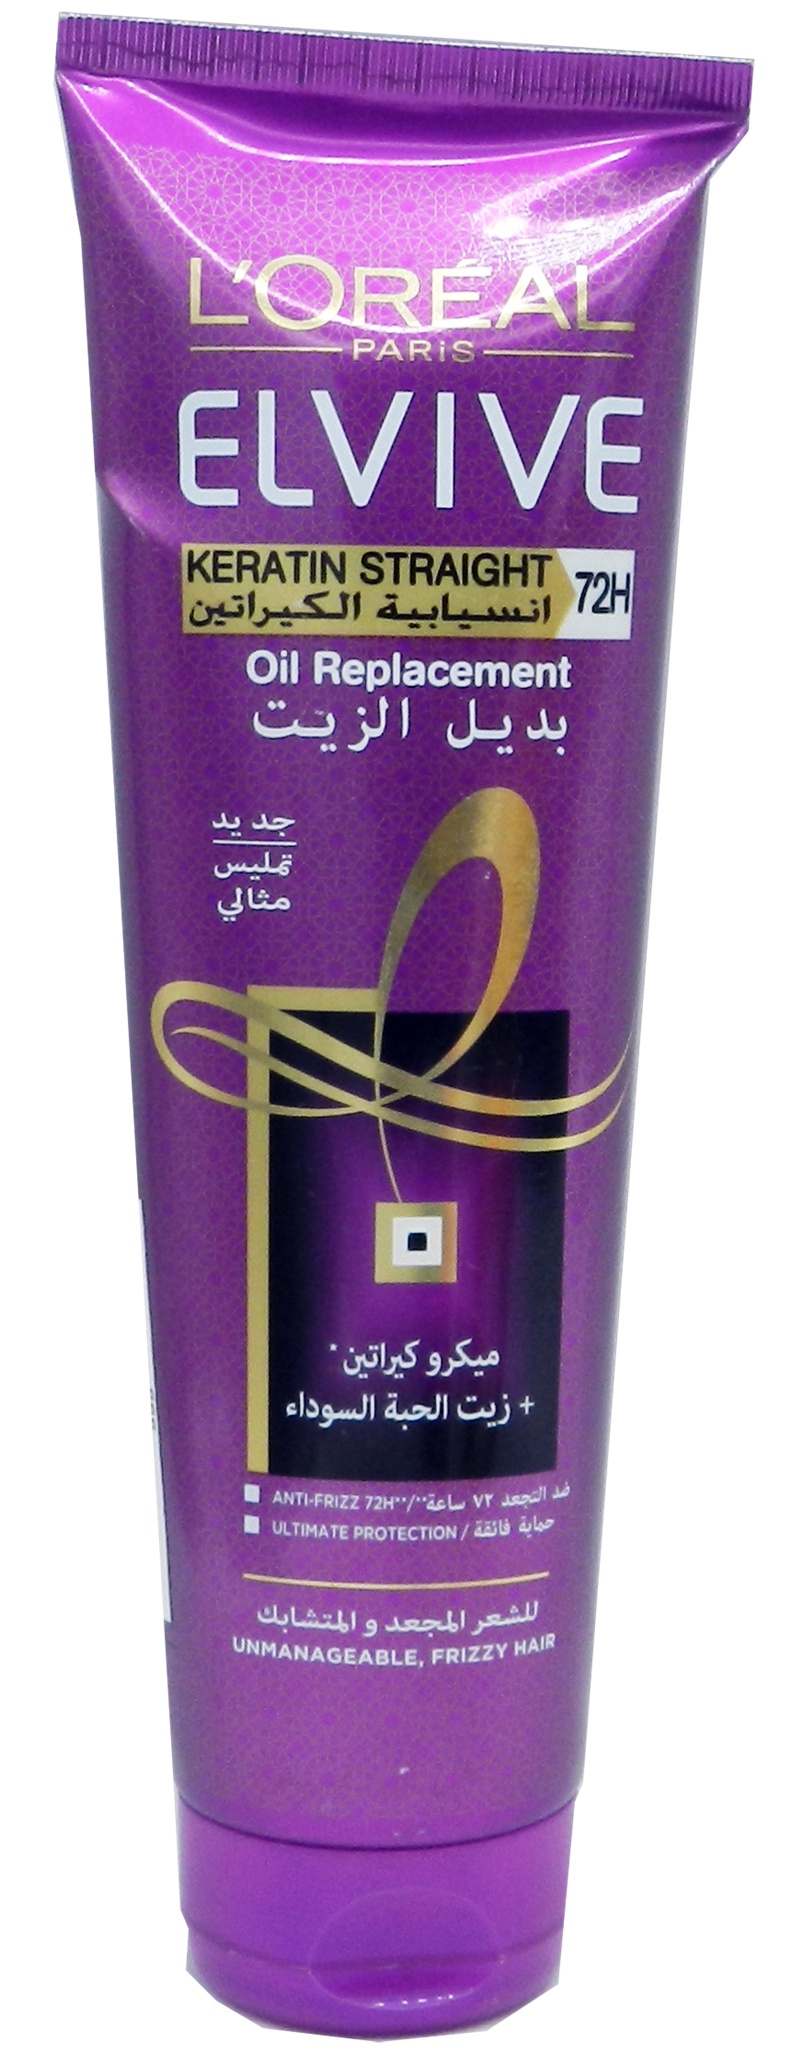 L'Oreal Elvive Keratin Straight Oil Replacement